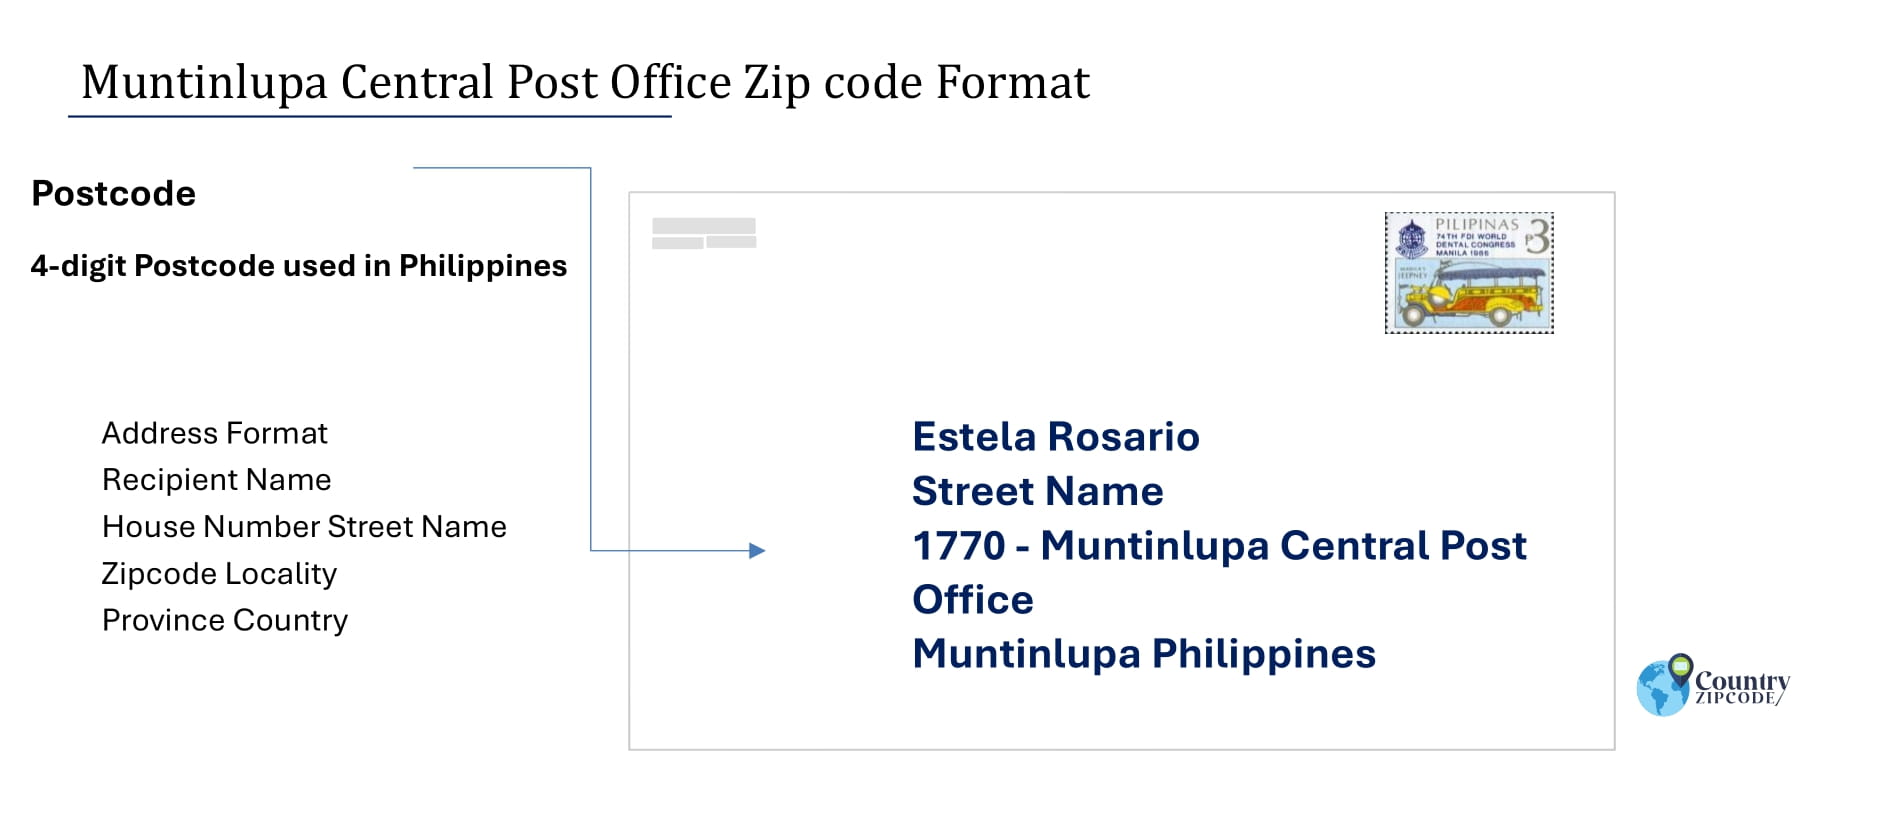 example of Muntinlupa Central Post Office Philippines zip code and address format